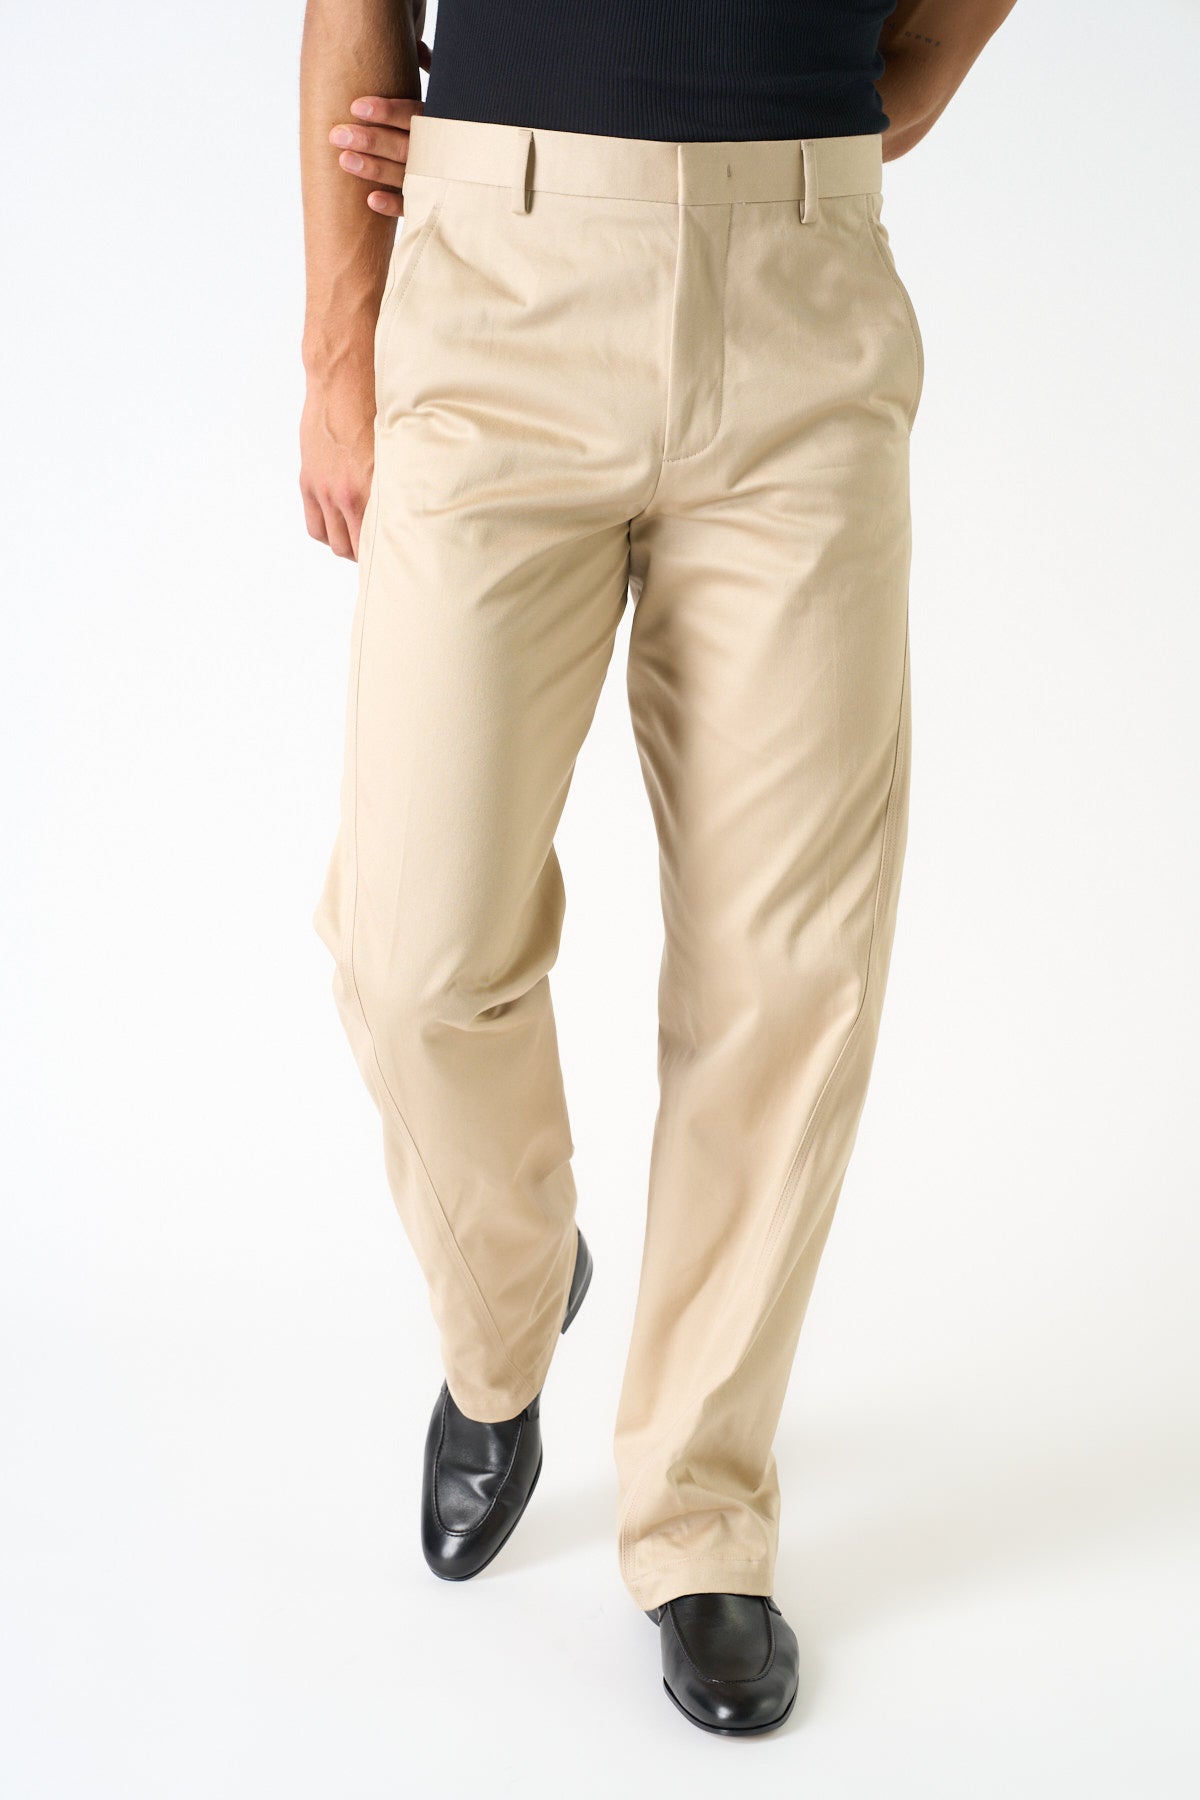 LANVIN | TWISTED CHINOS